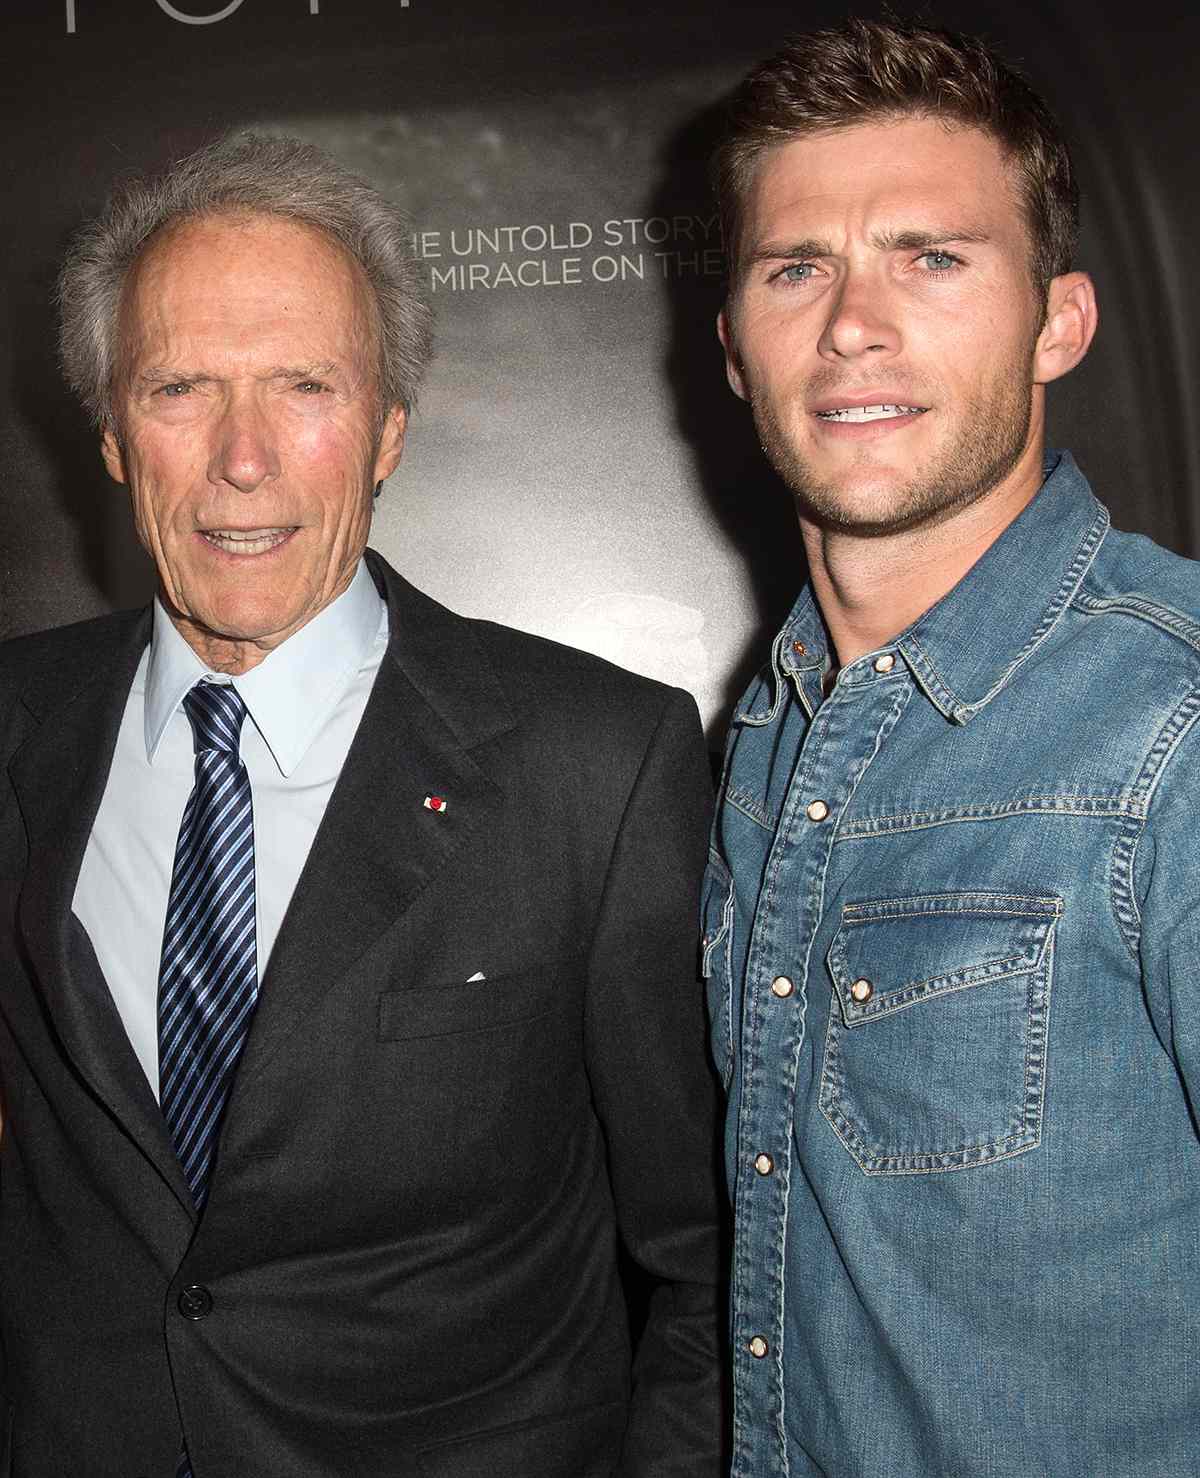 Clint Eastwood Net Worth: Hollywood's Wealthy Titan, According To Forbes